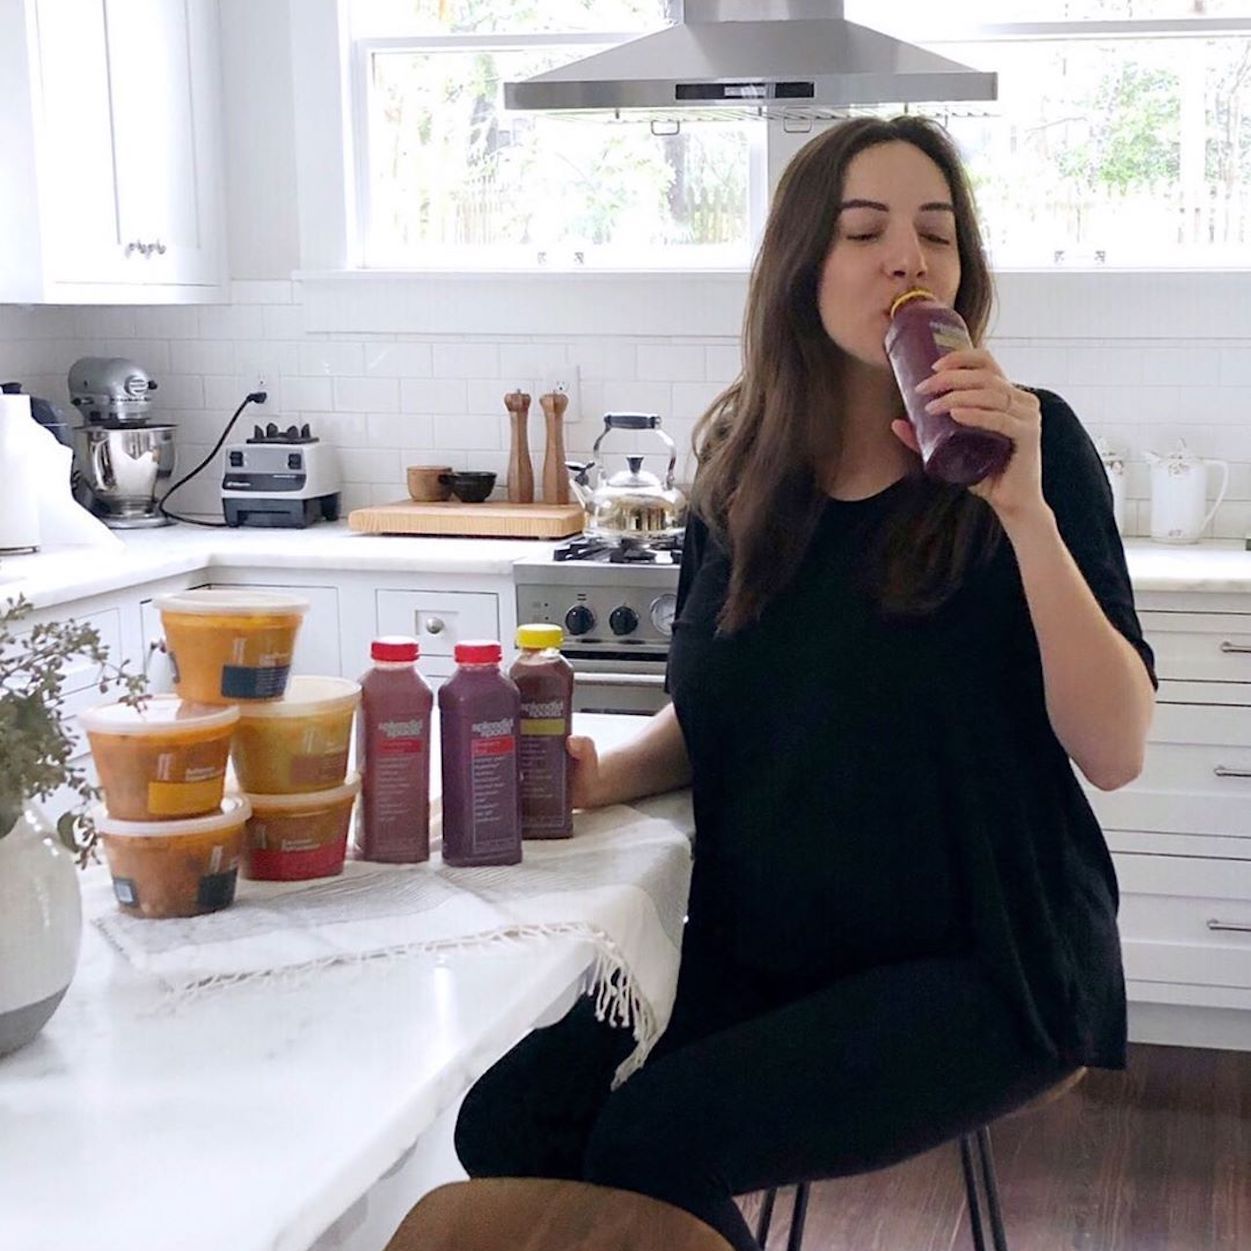 The social media personality Helene Kusman looking relaxed, sitting on a stool in a white, sun-filled kitchen, drinking a Splendid Spoon smoothie. On the counter top in front of her are a variety of Splendid Spoon smoothies and bowls.